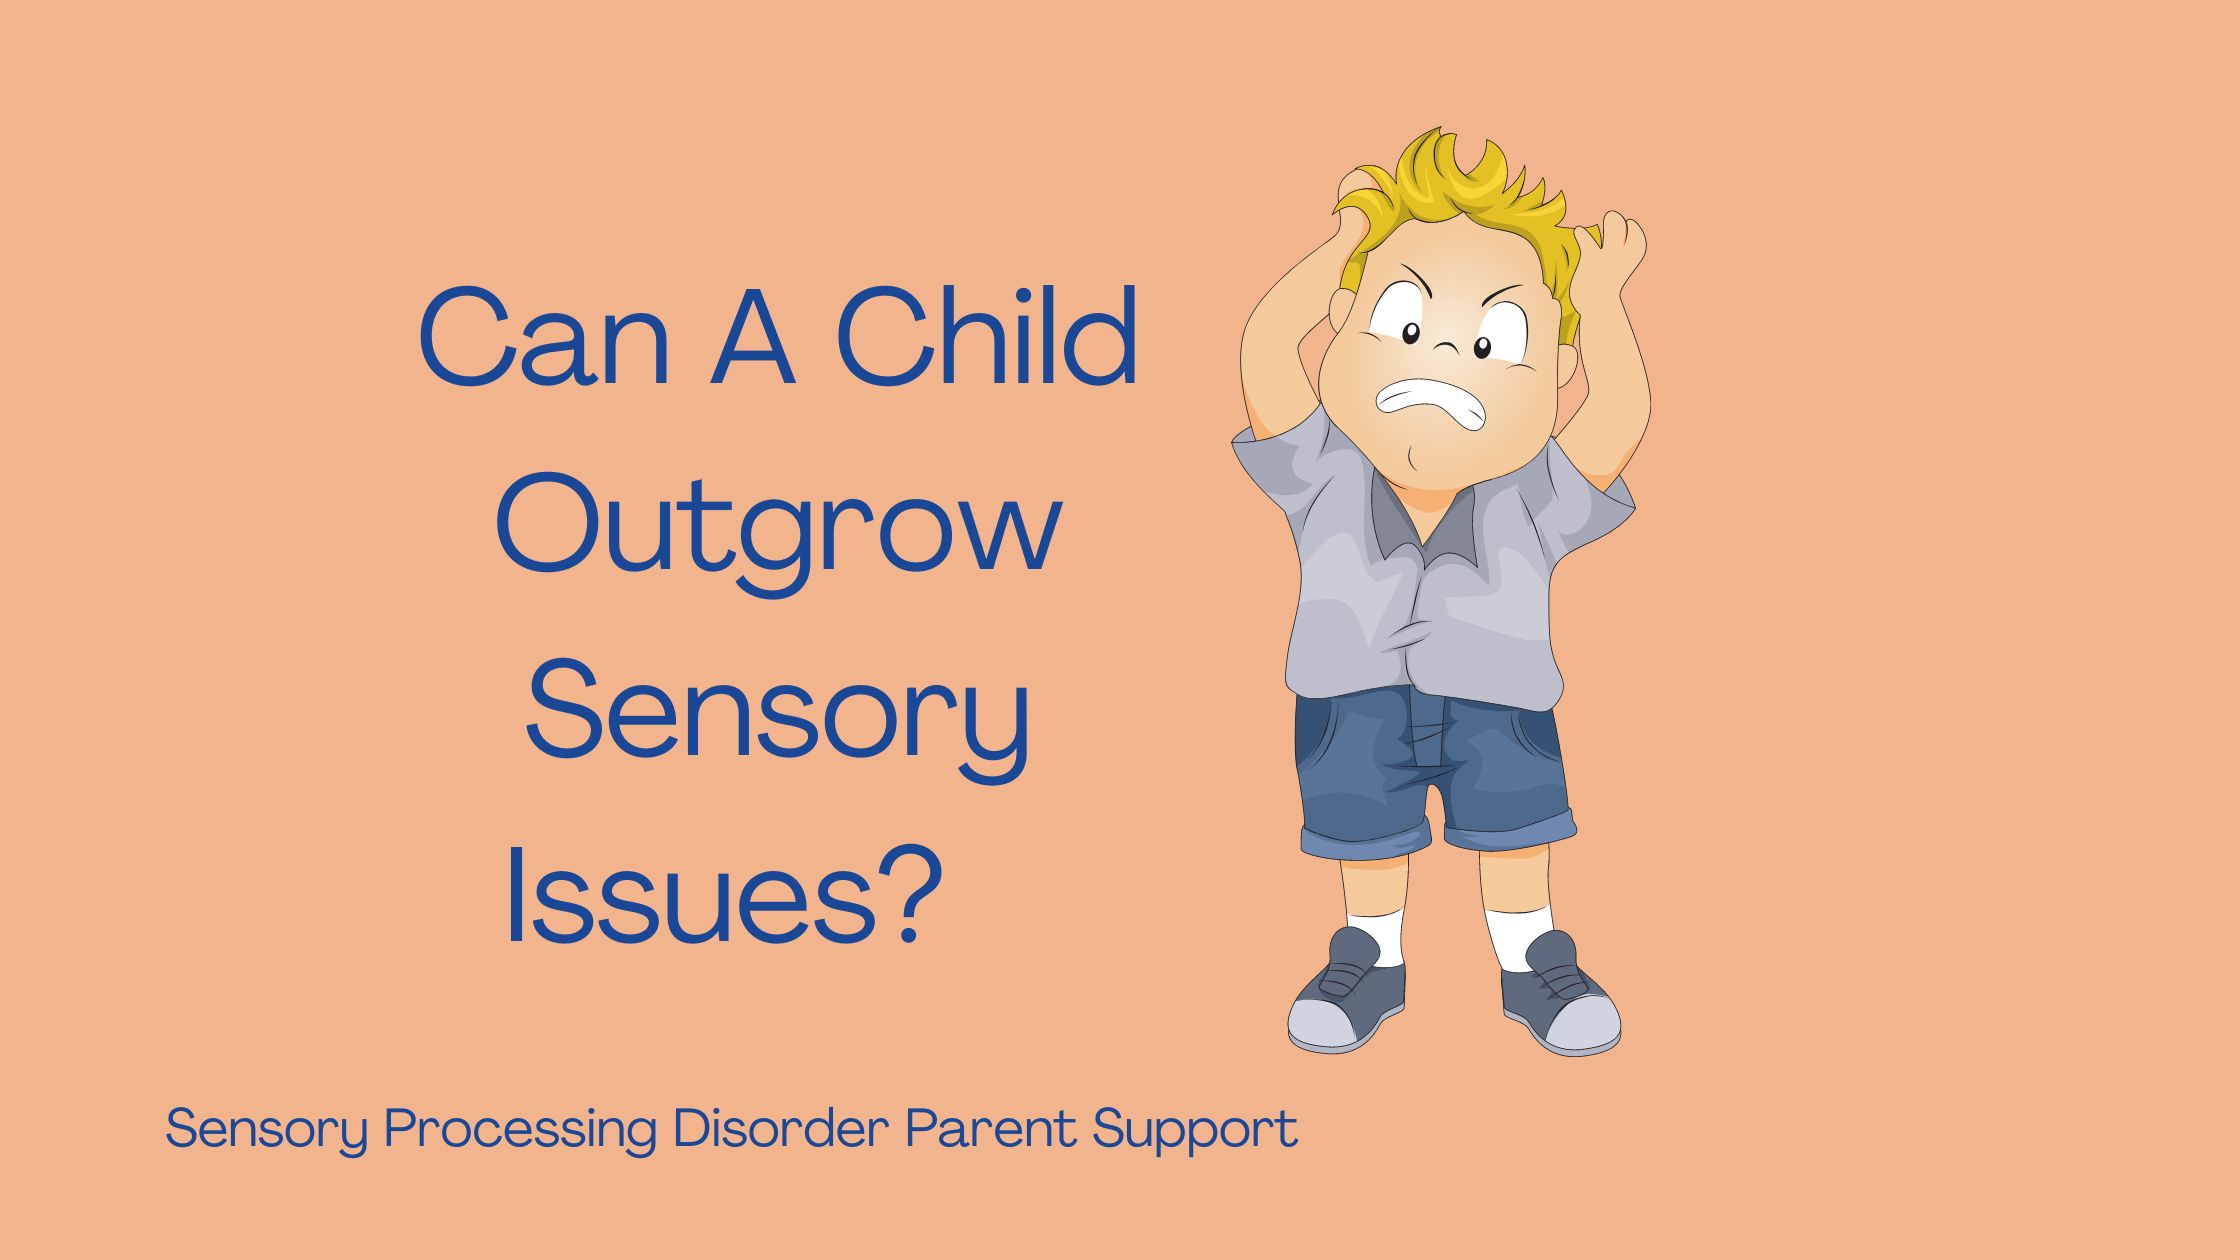 frustrated child who has sensory processing disorder Can A Child Outgrow Sensory Issues?